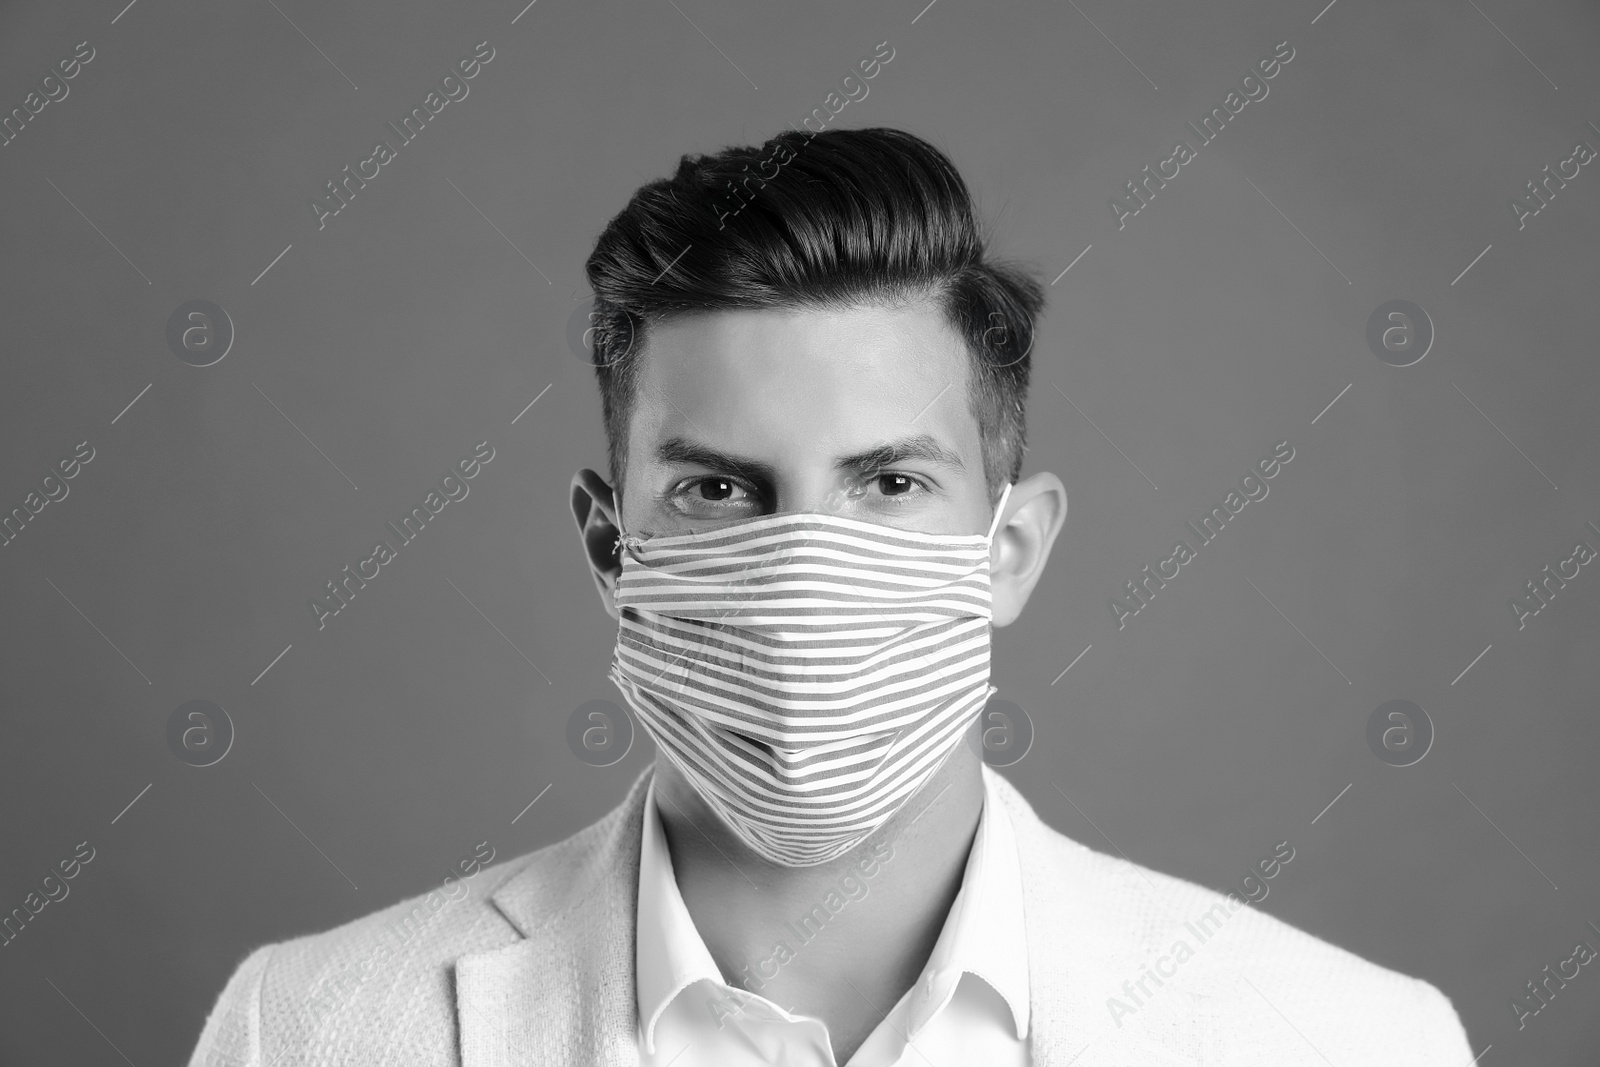 Image of Man wearing medical face mask on grey background. Black and white photography